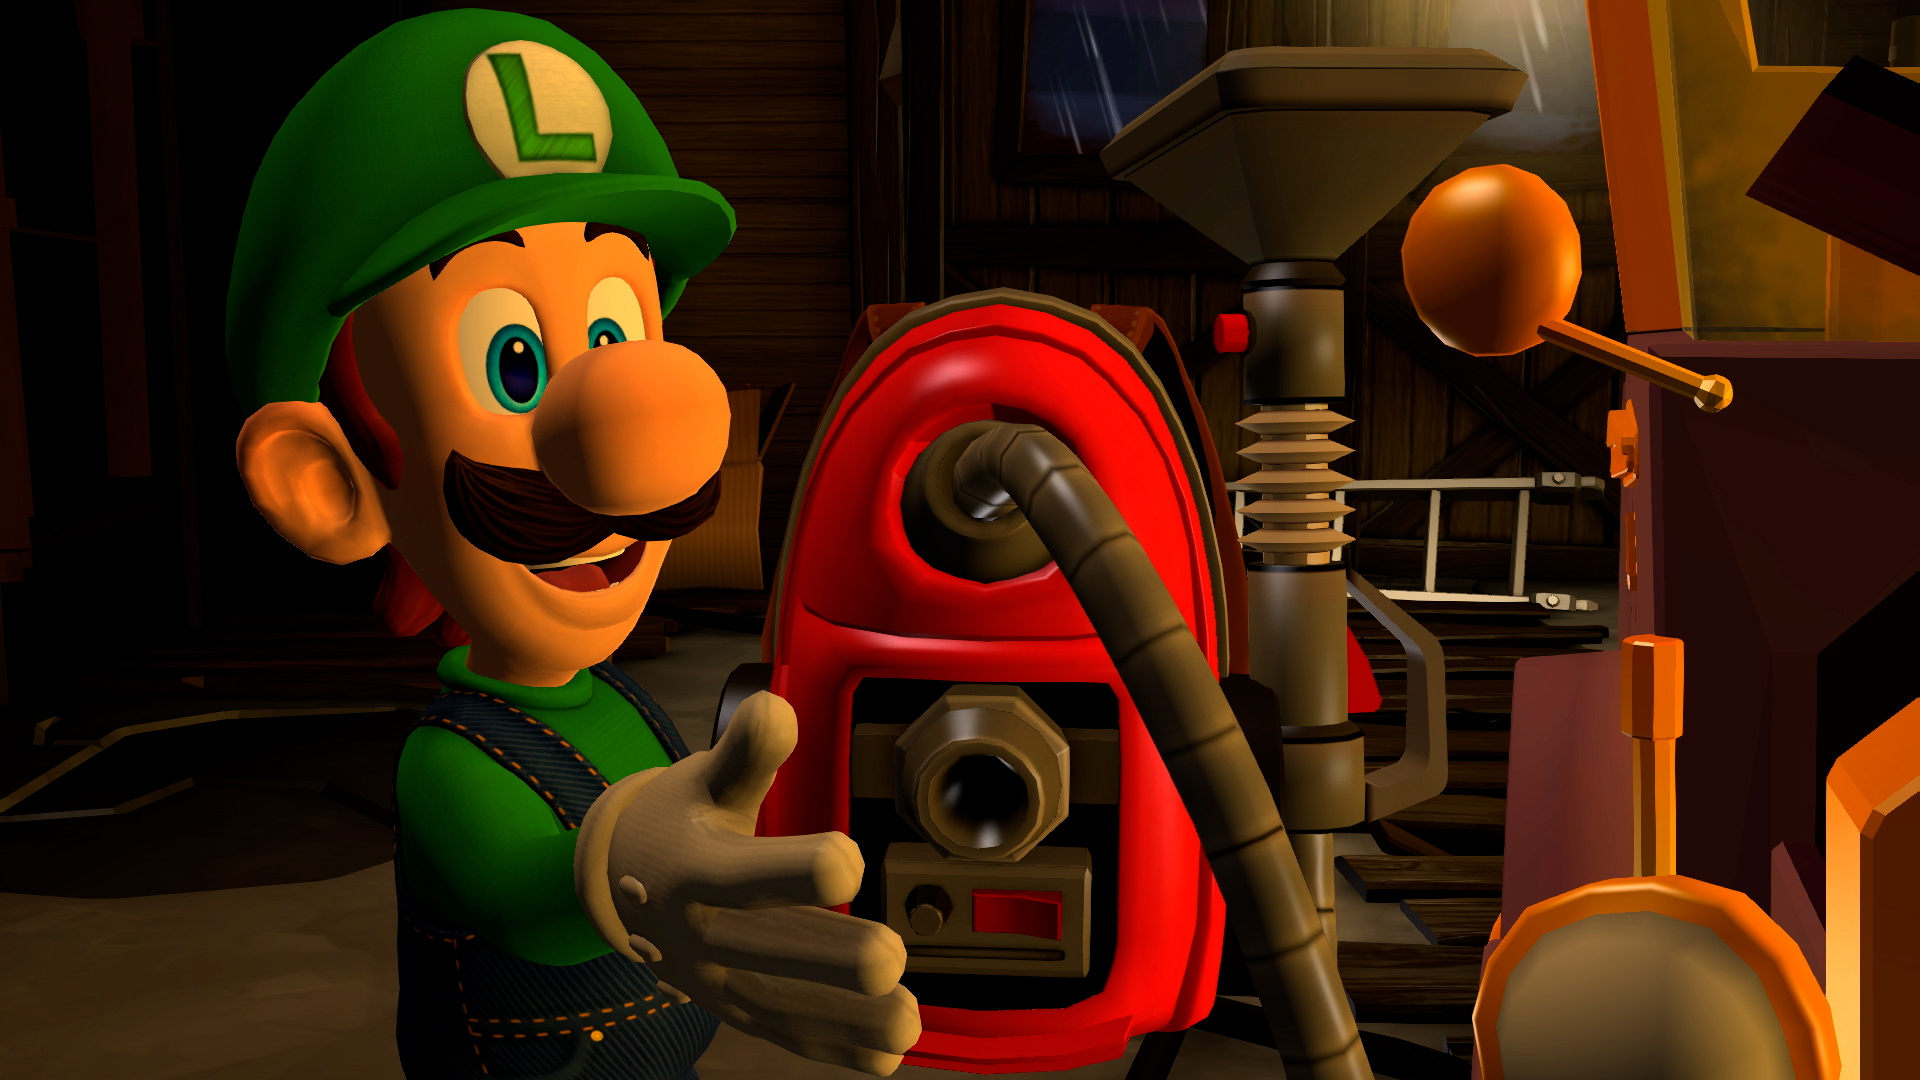 Luigi's Mansion 2 HD Gets a Switch Release Date and Four-Player Co-op